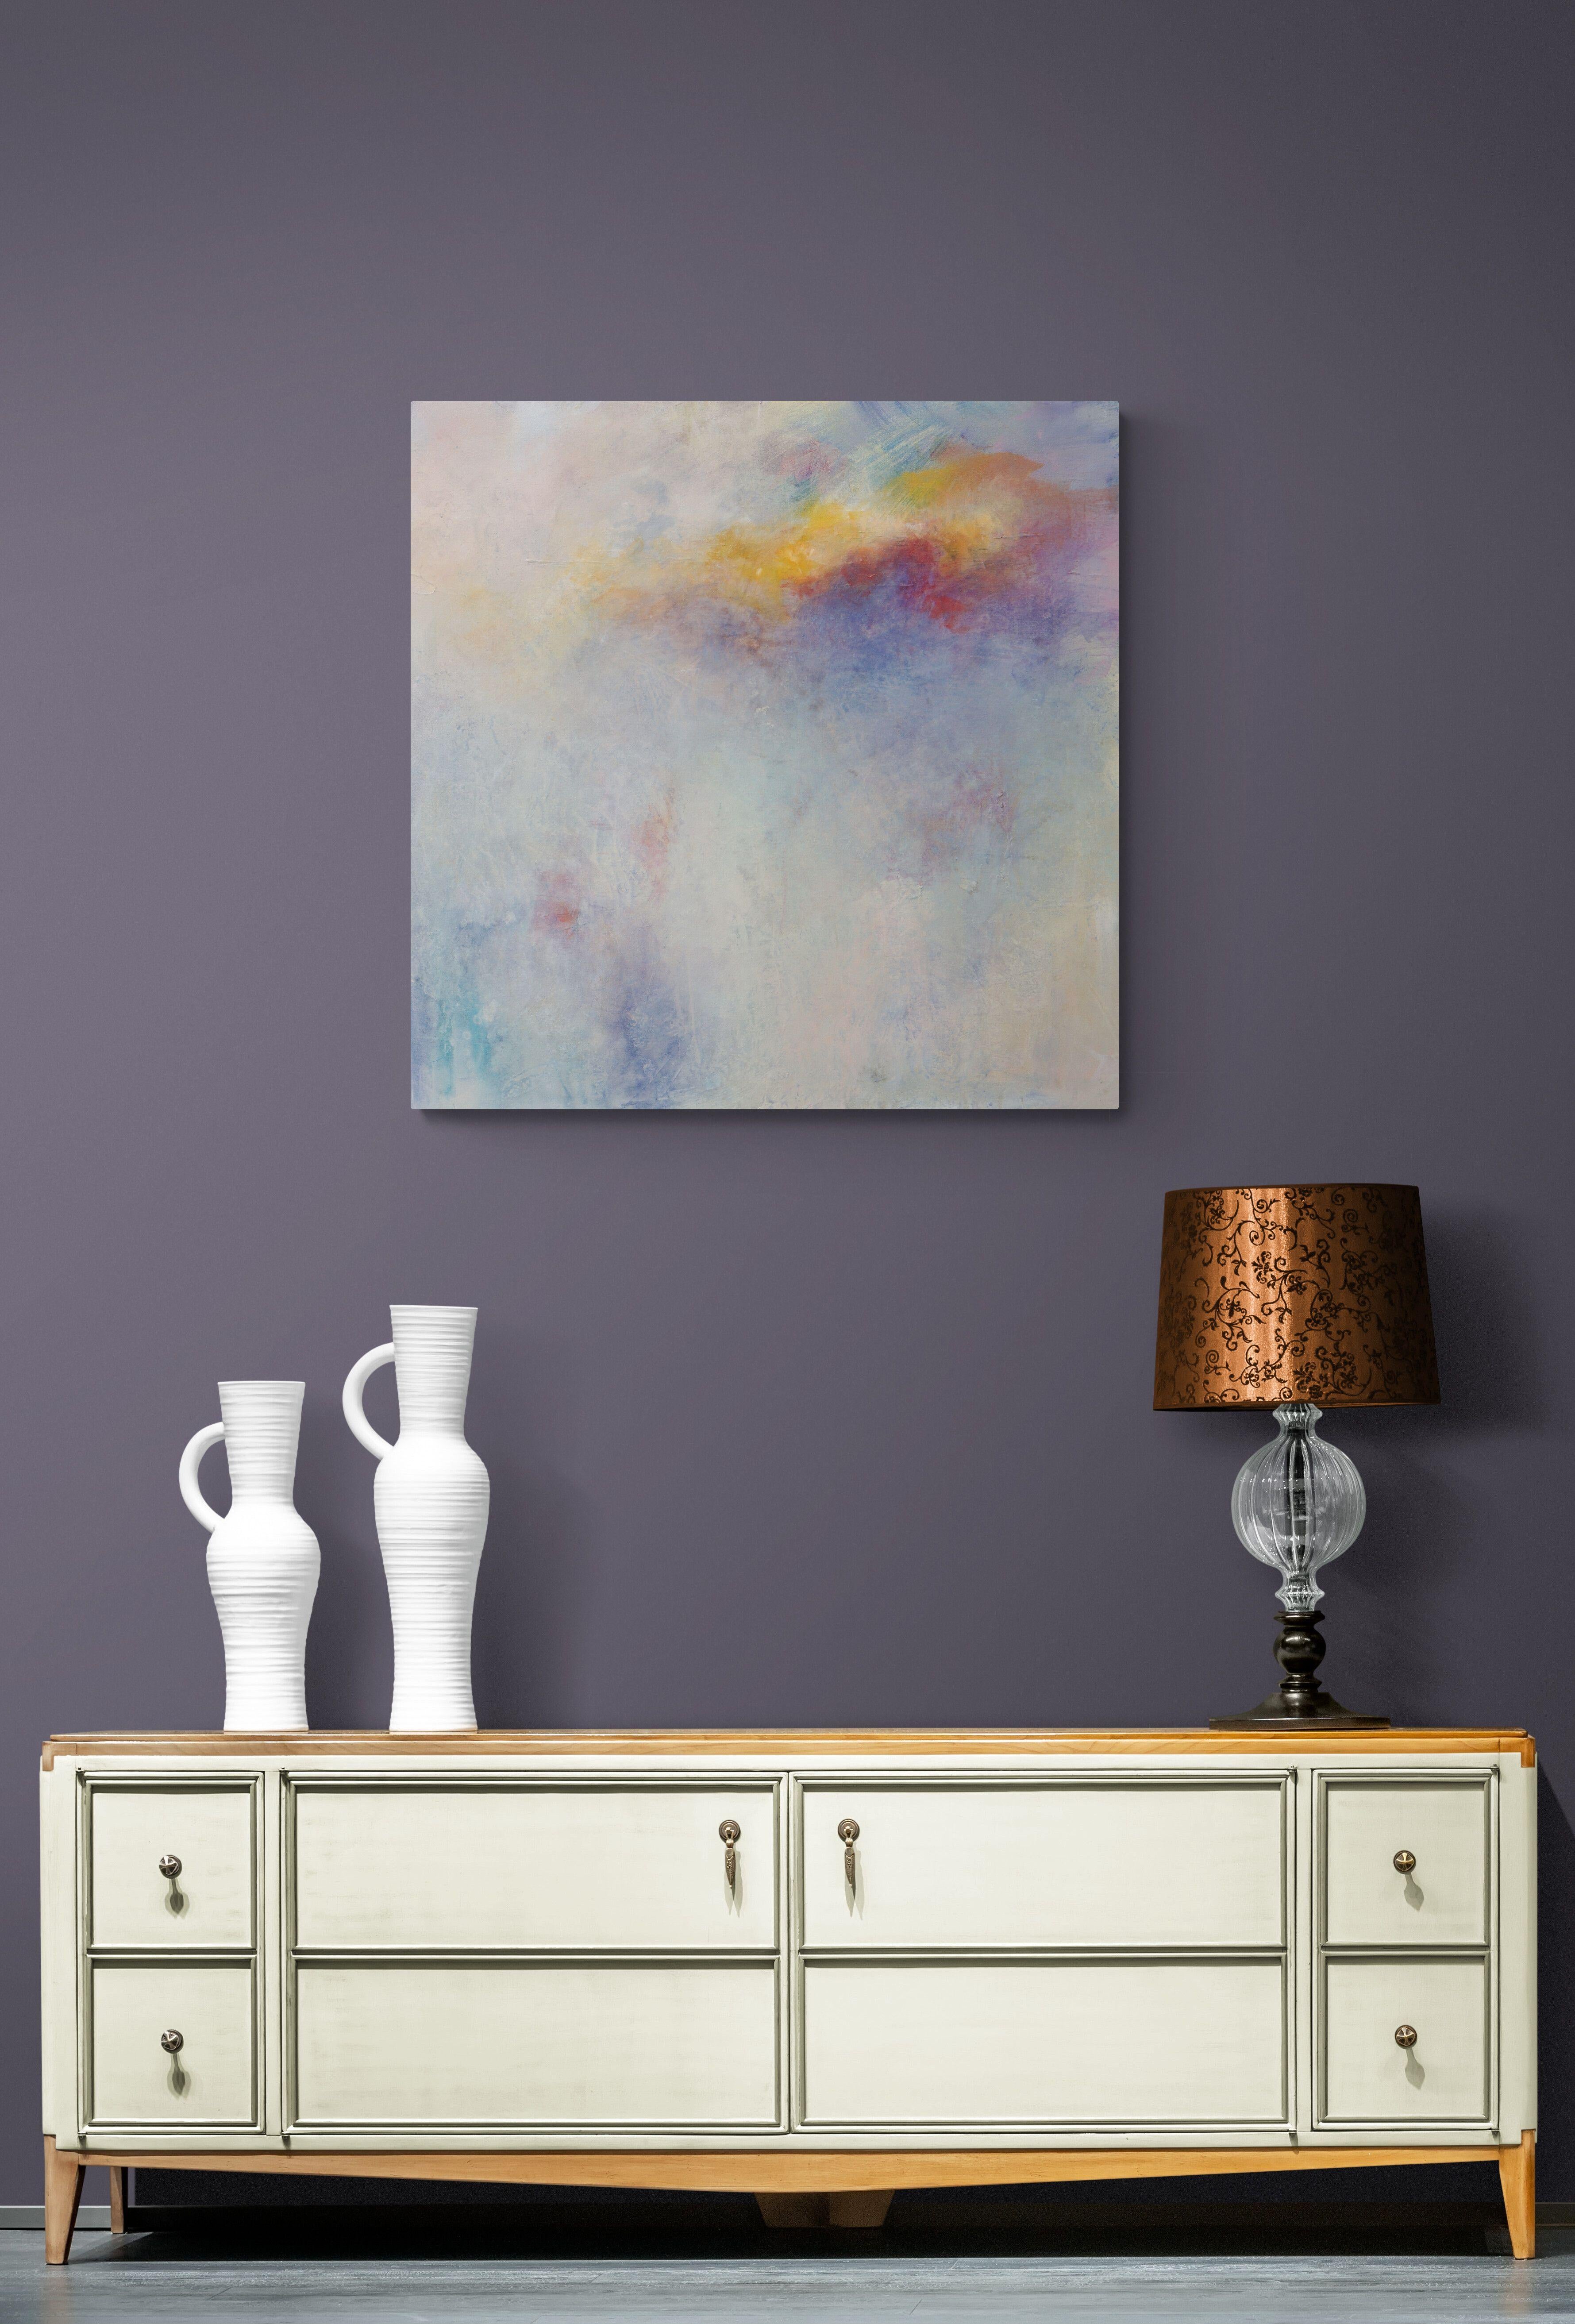 This original panting is an abstract on a gallery wrapped canvas.  The canvas is soft and neutral with a bold band of color so therefore the title.  There are 10+ layers of acrylic paint and washes that give the piece nuance, depth, and interest.